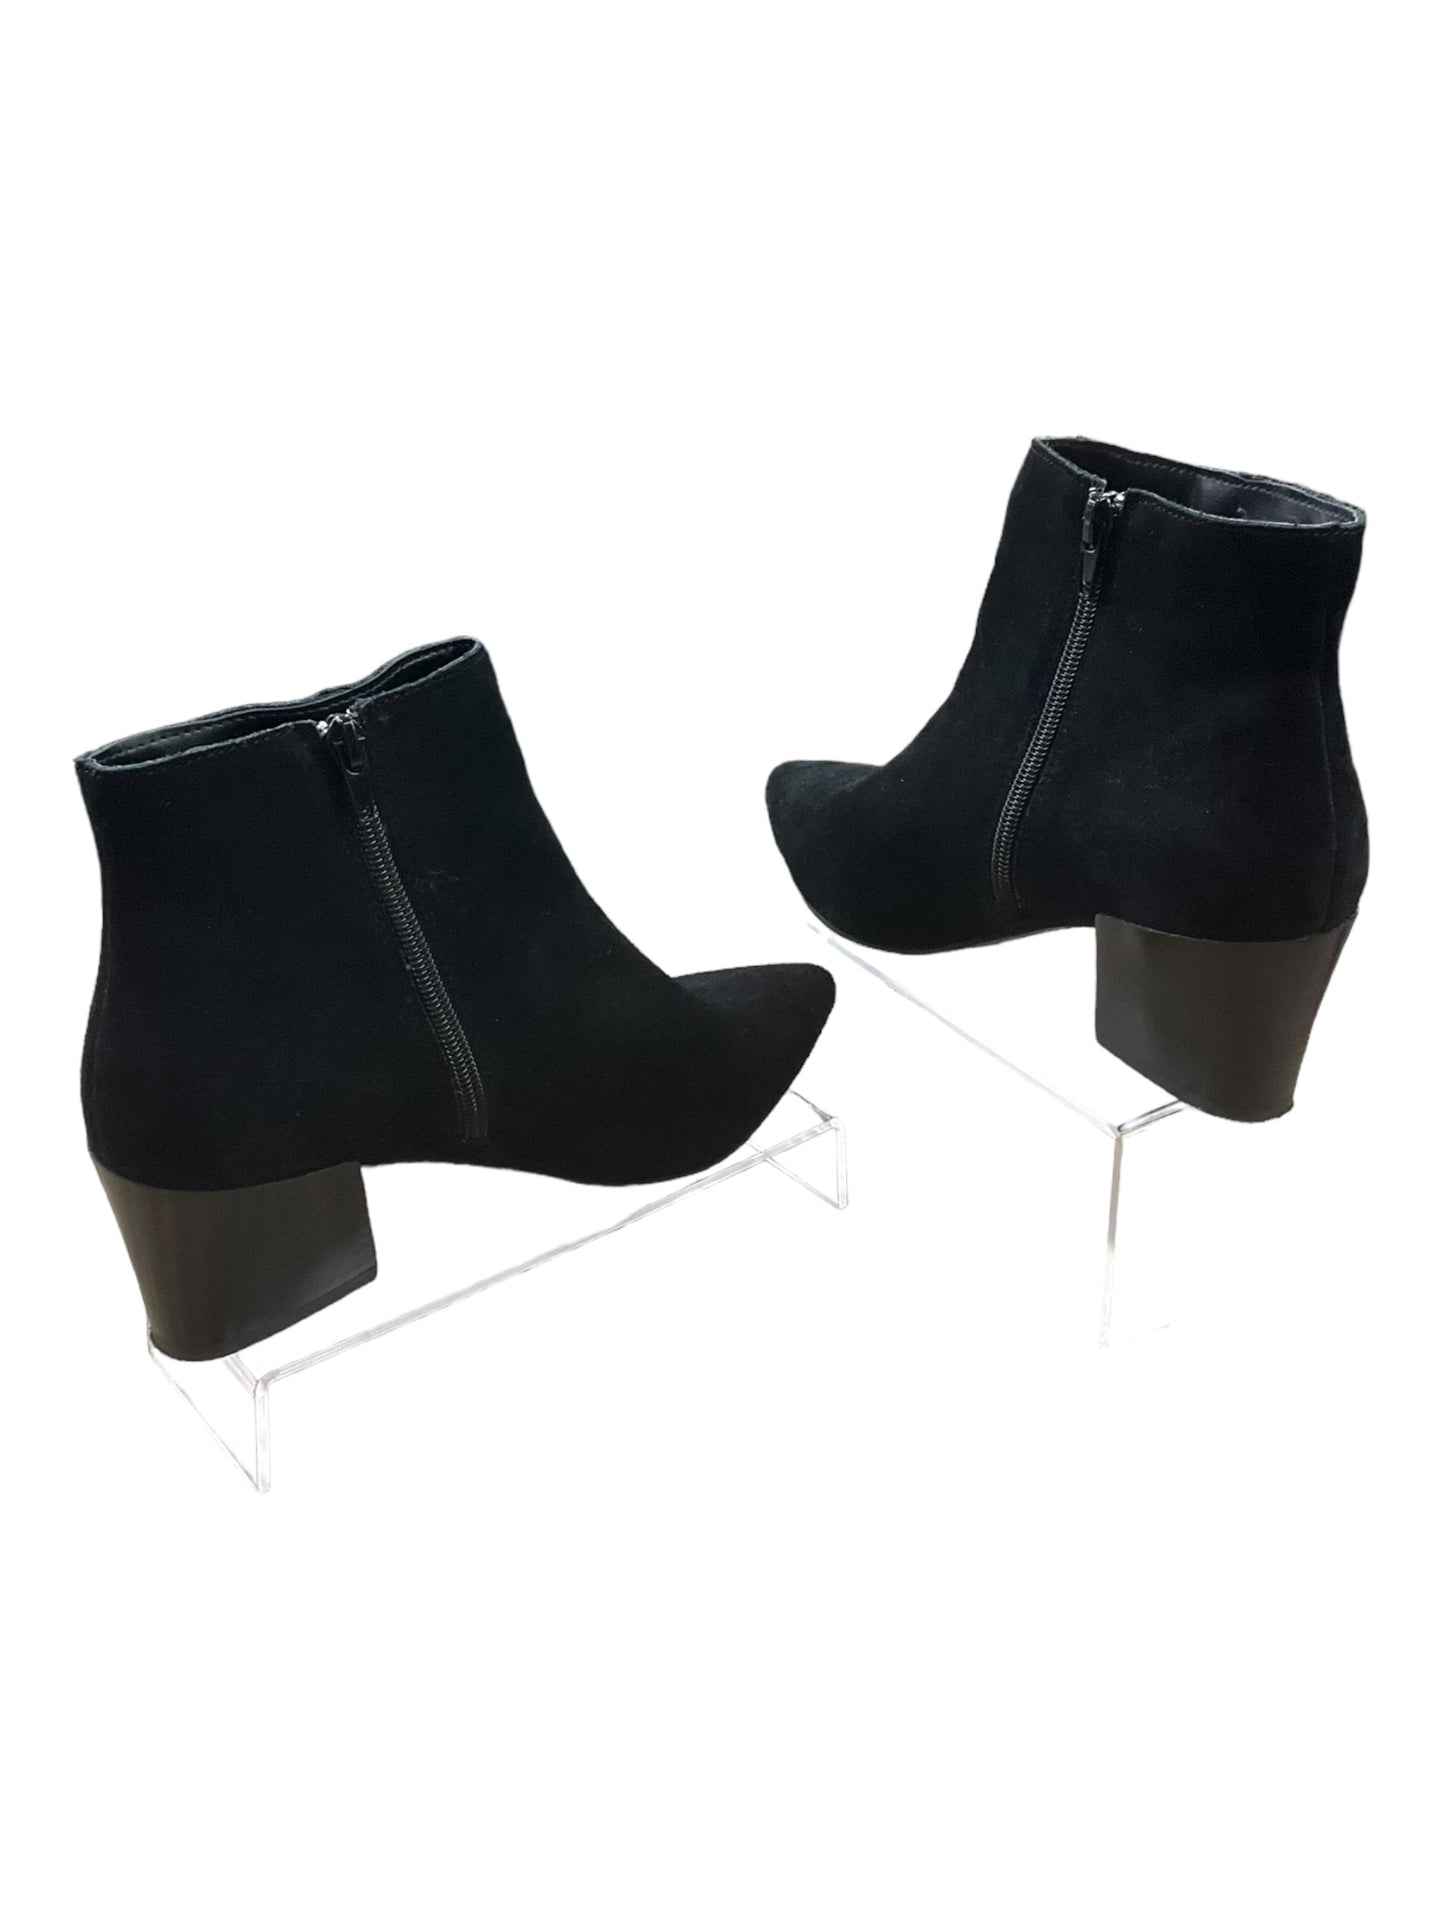 Boots Ankle Heels By Kensie  Size: 7.5